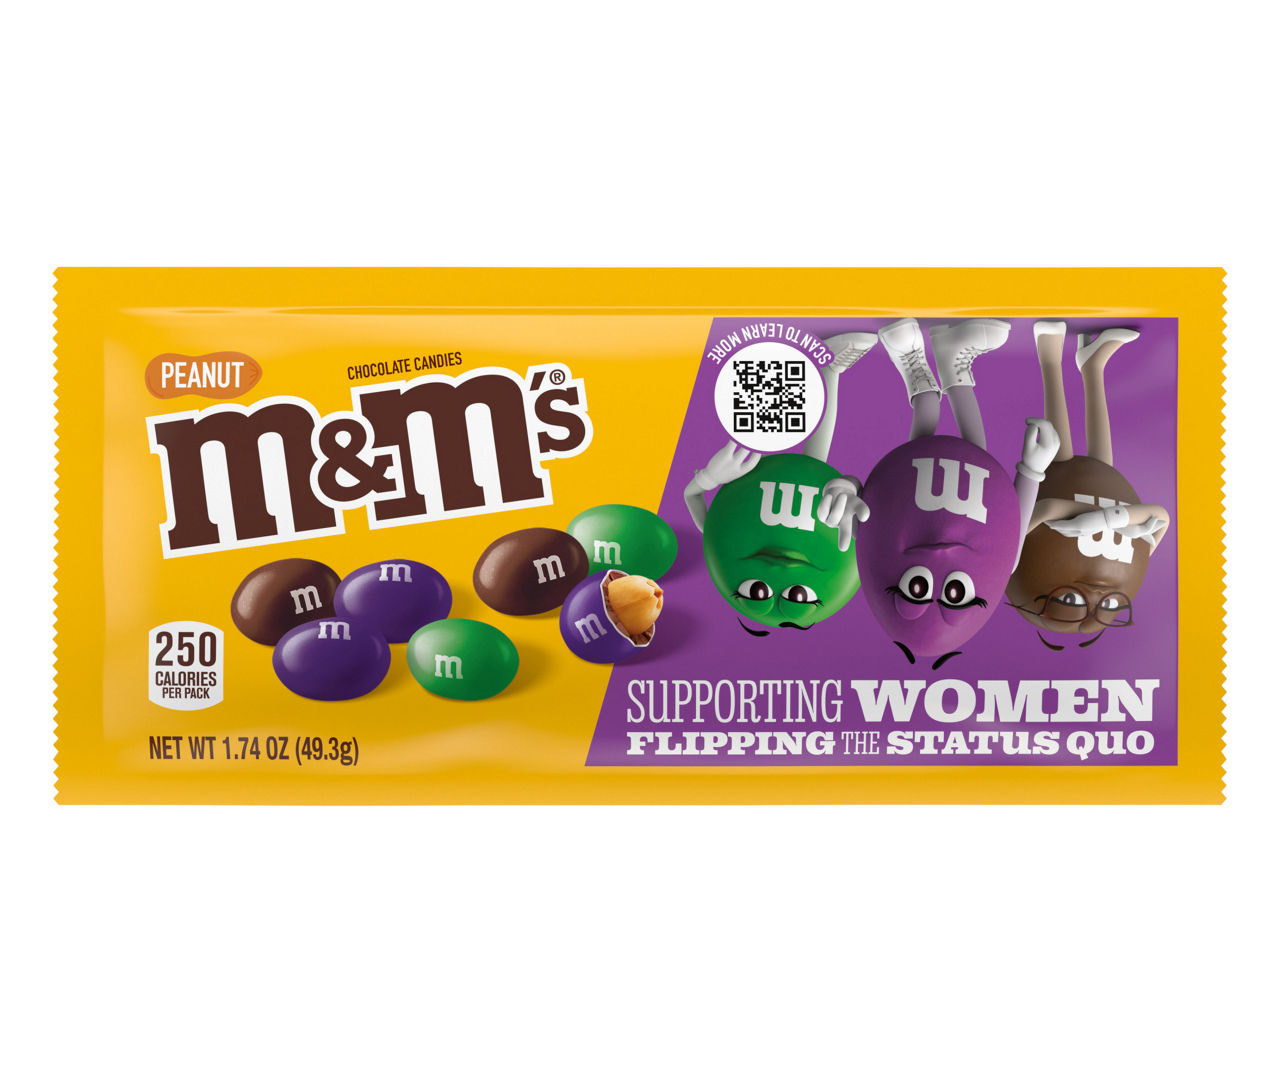 M&M's Debuts Purple Candy, Its First New Color in 10 Years - CNET